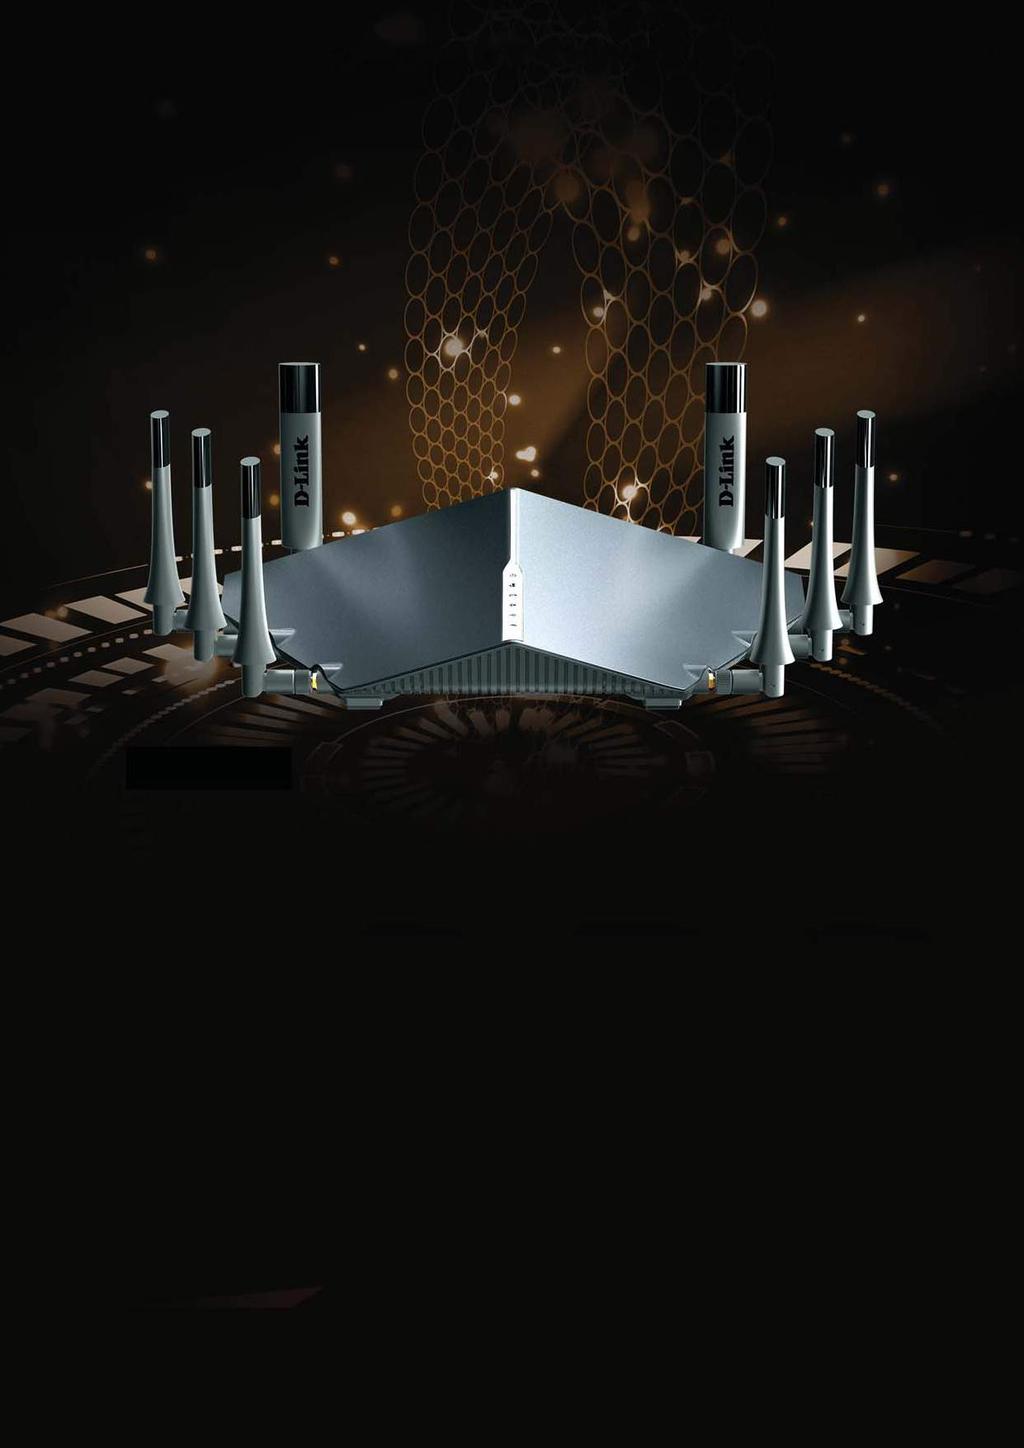 CONNECTIVITY DIR-895L AWARD WINNING AND POWERFUL The AC5300 Ultra Wi-Fi Router brings speeds up to 5.3Gbps, Smart Connect Technology, a 1.4GHz processor and 8 antennas for maximum coverage.